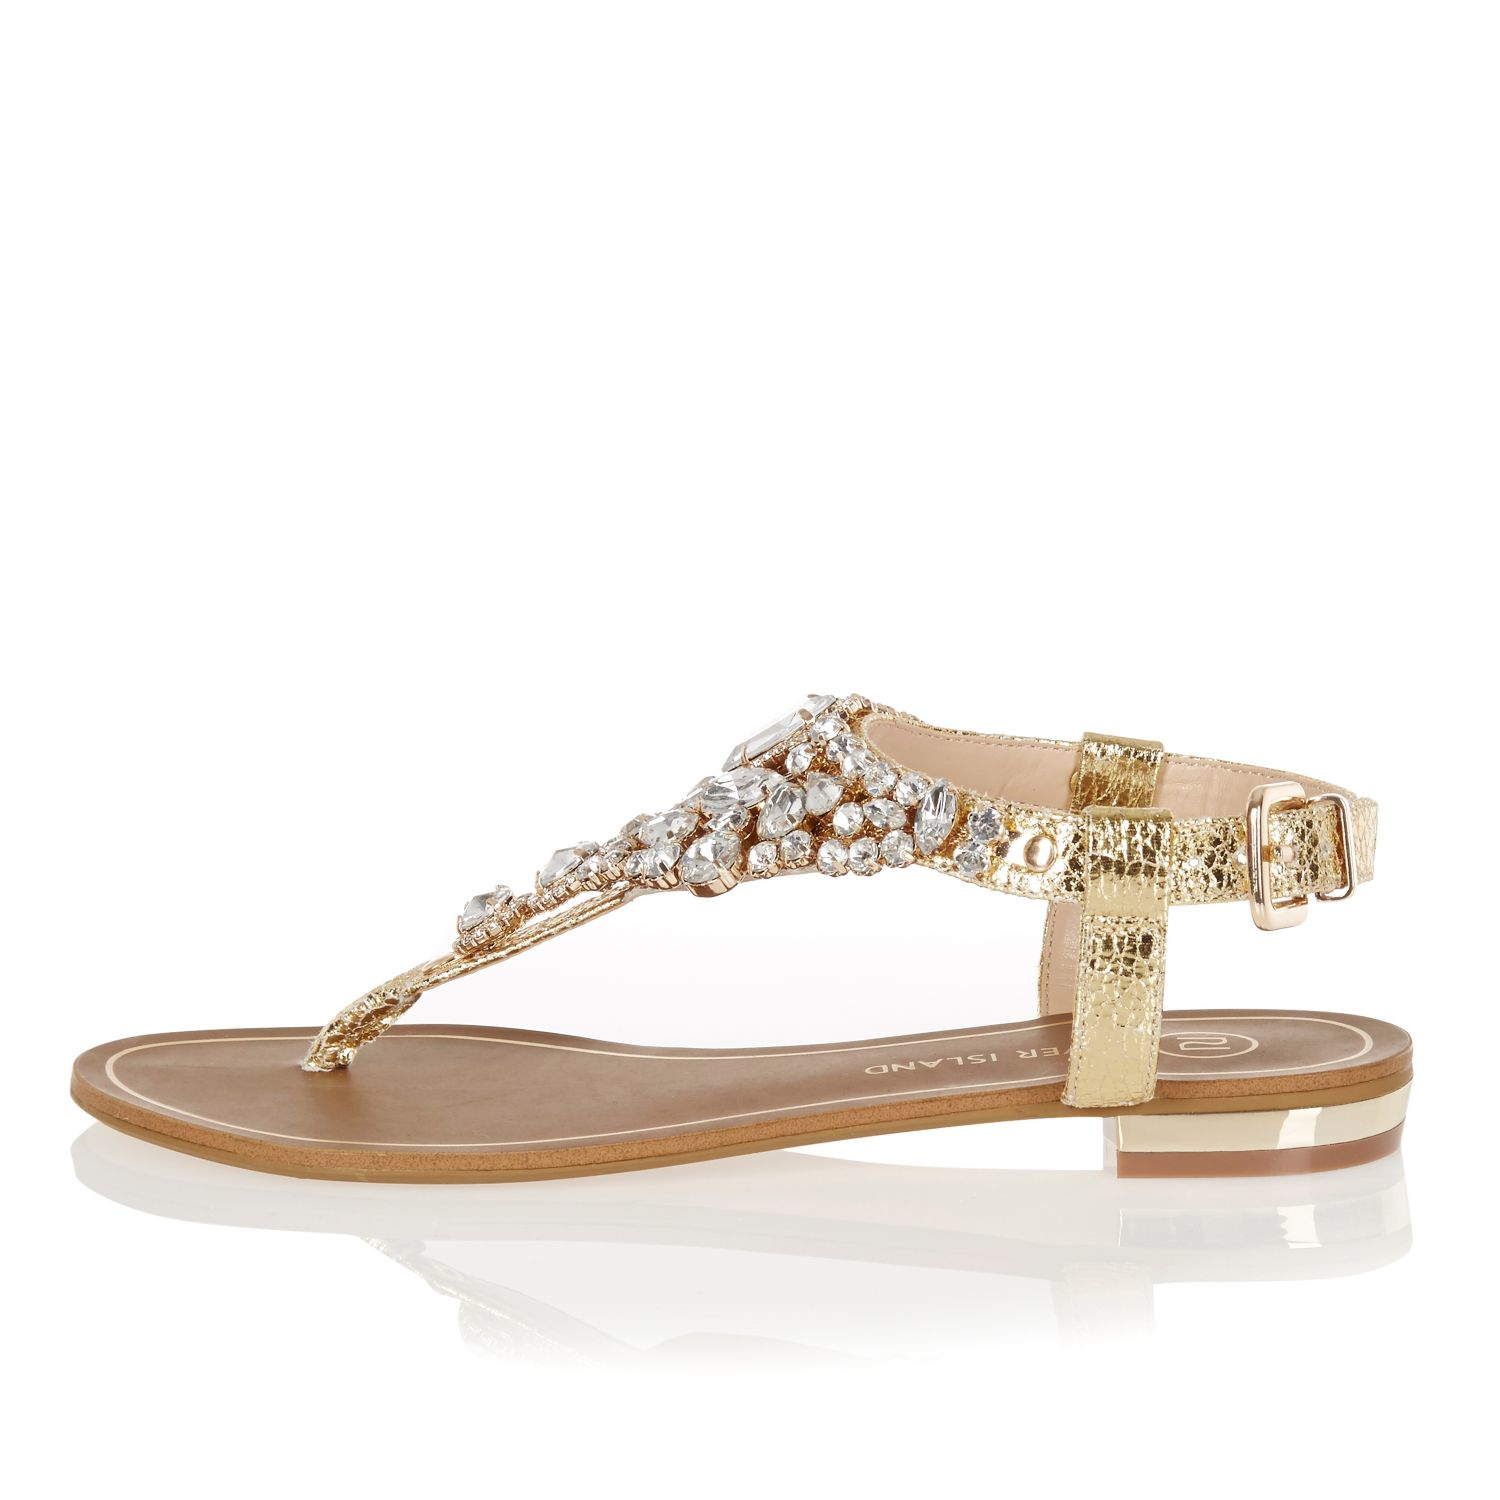 River Island Gold Metallic Embellished Sandals in Brown | Lyst